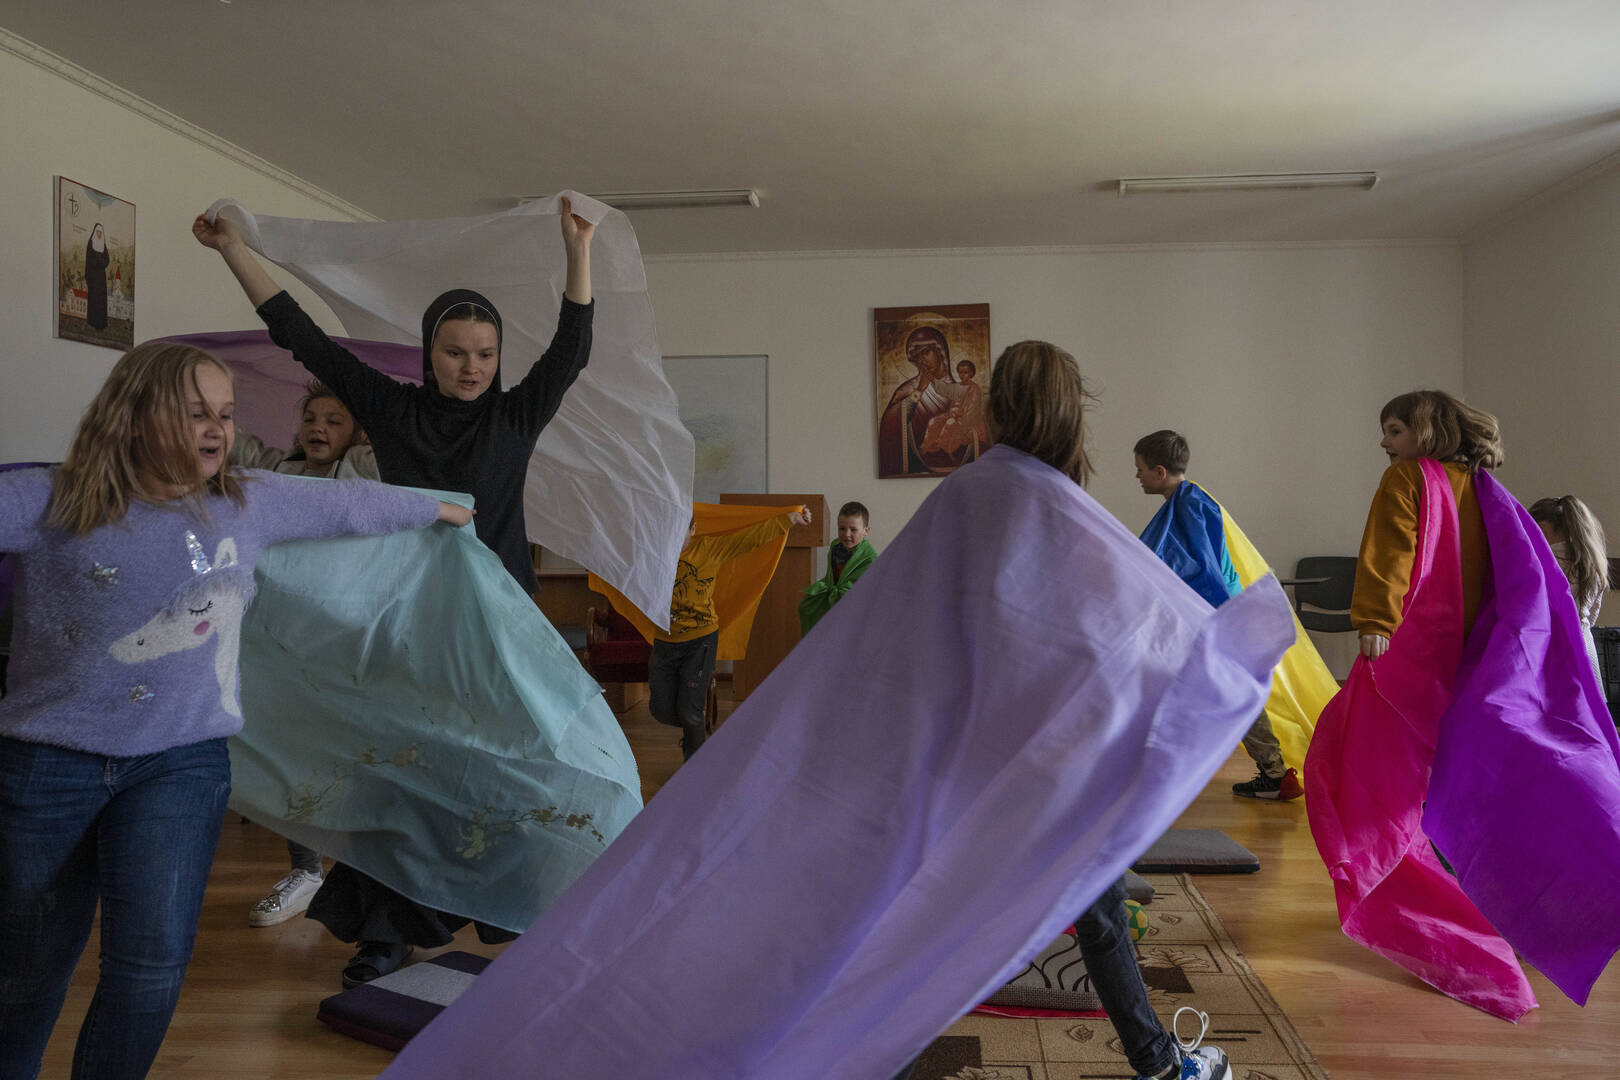 Nuns play with internally displaced children, who are taking refuge at the Hoshiv Women's Monastery, in Ivano-Frankivsk region, western Ukraine, Wednesday, April 6, 2022. (AP Photo/Nariman El-Mofty)